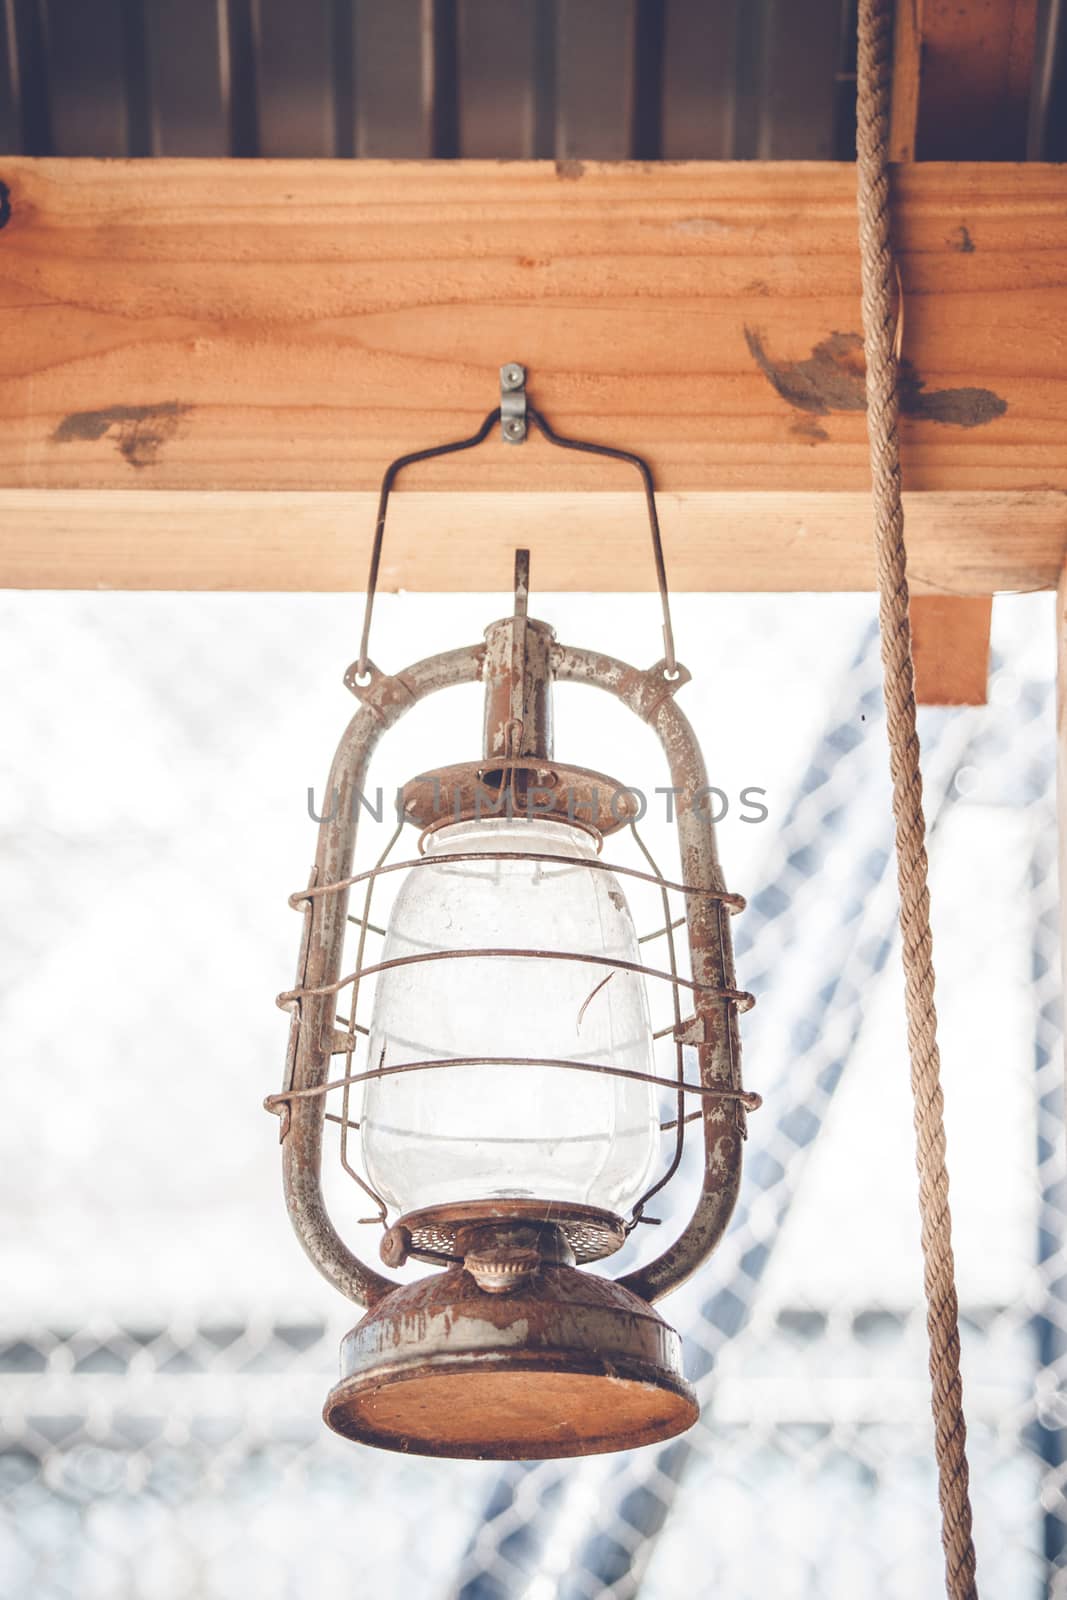 Vintage western lantern hanging on a wooden plank by Sportactive